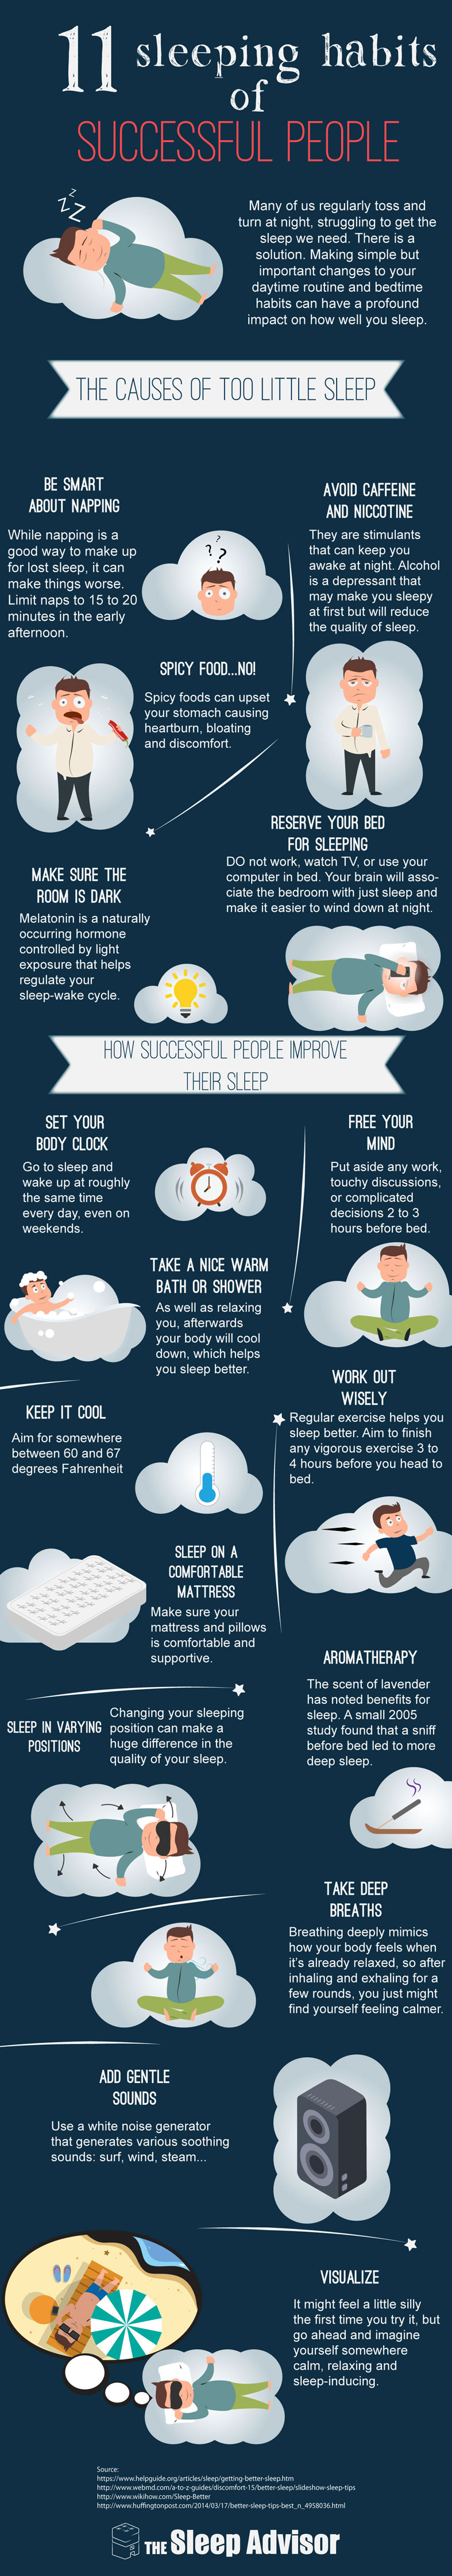 sleep routines of the successful infographic